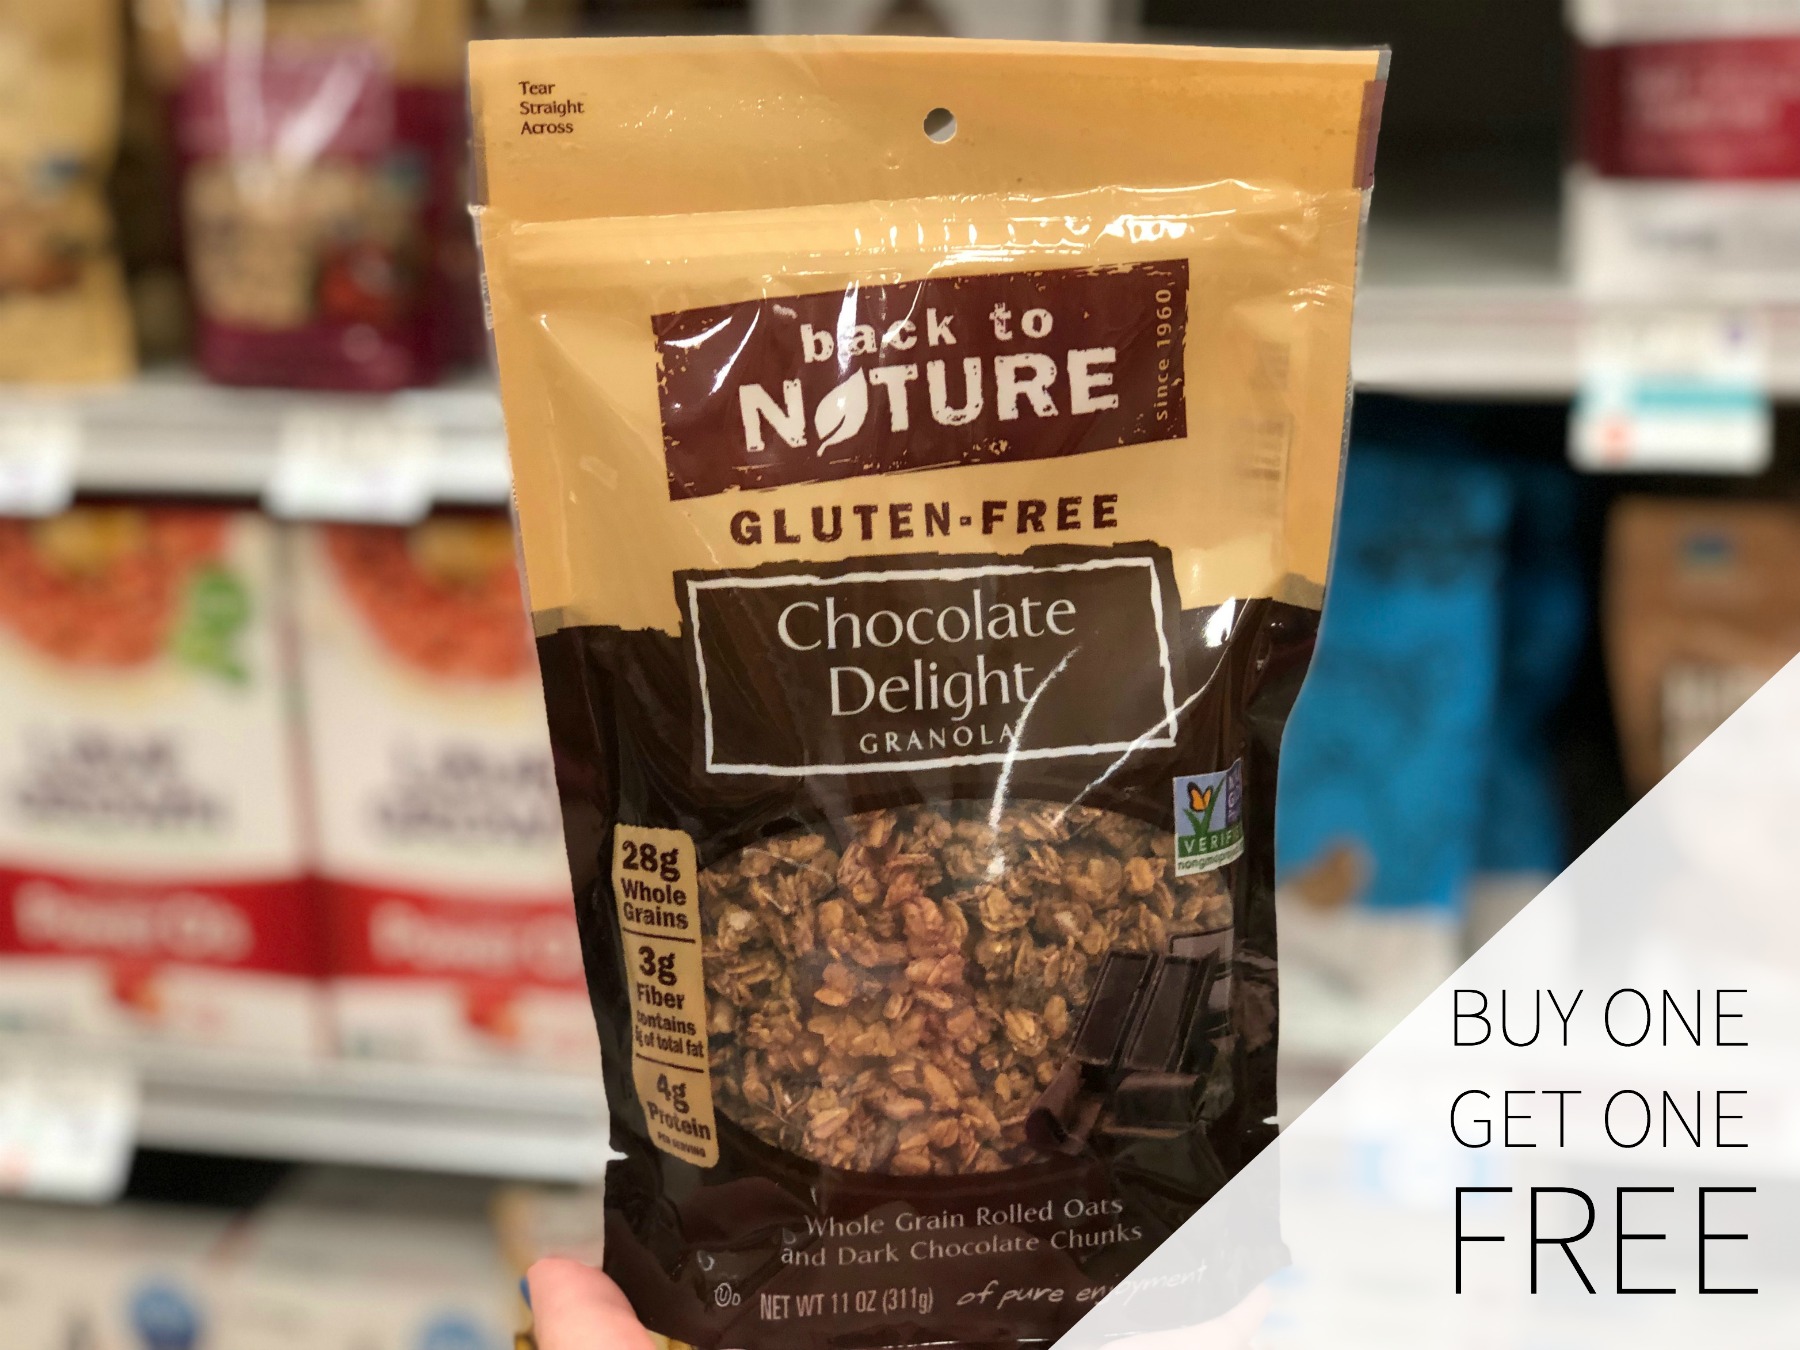 Fantastic Deal On Back To Nature Granola This Week At Publix on I Heart Publix 3